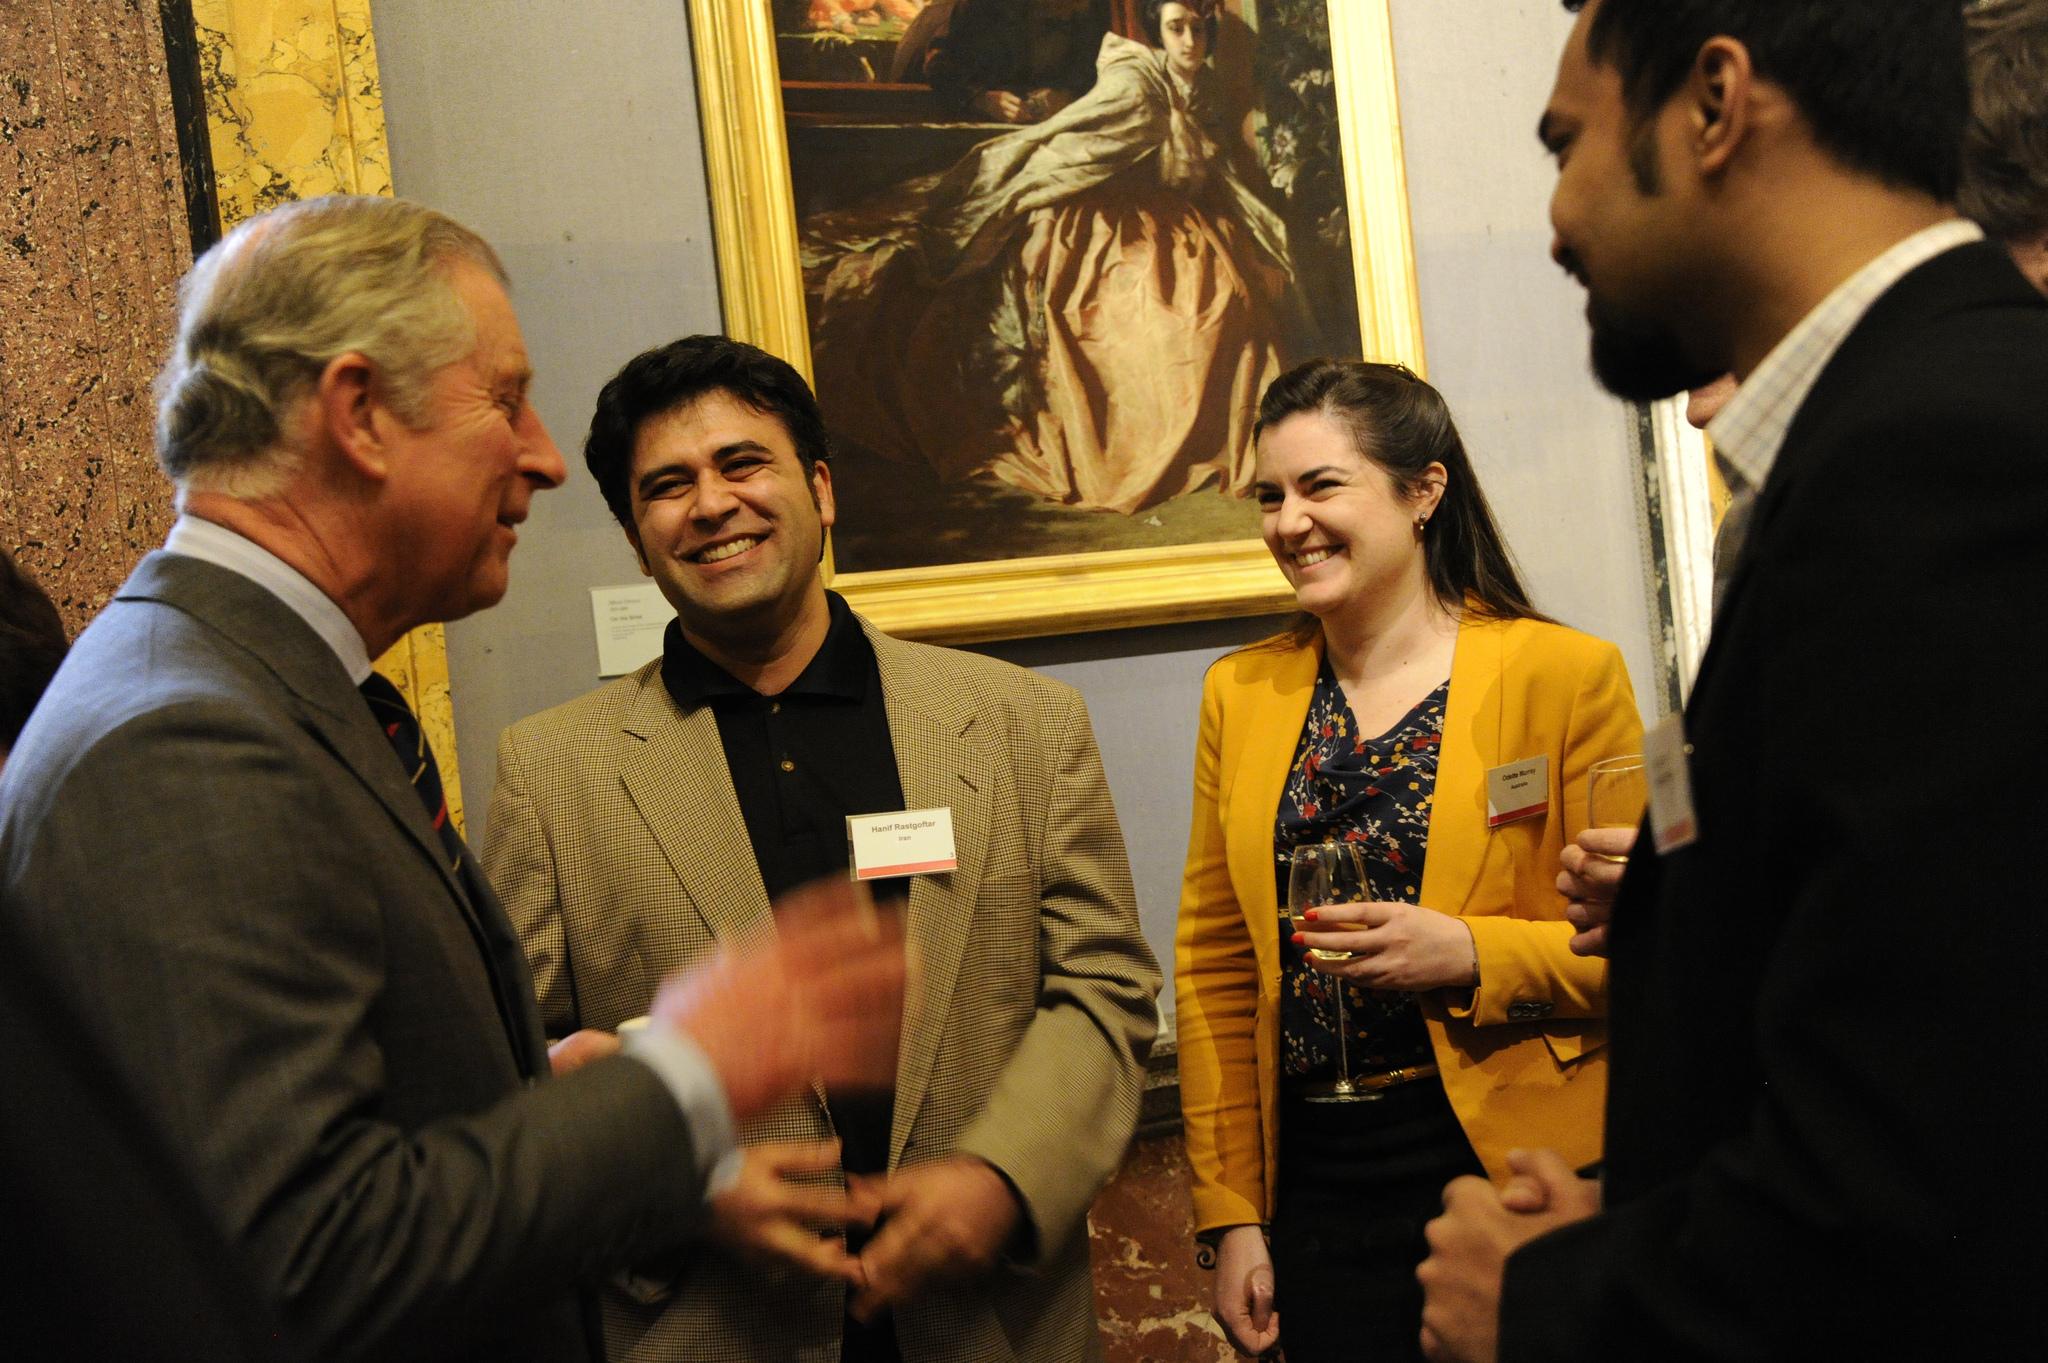 HRH The Prince of Wales at Cambridge Trusts Scholar's Reception